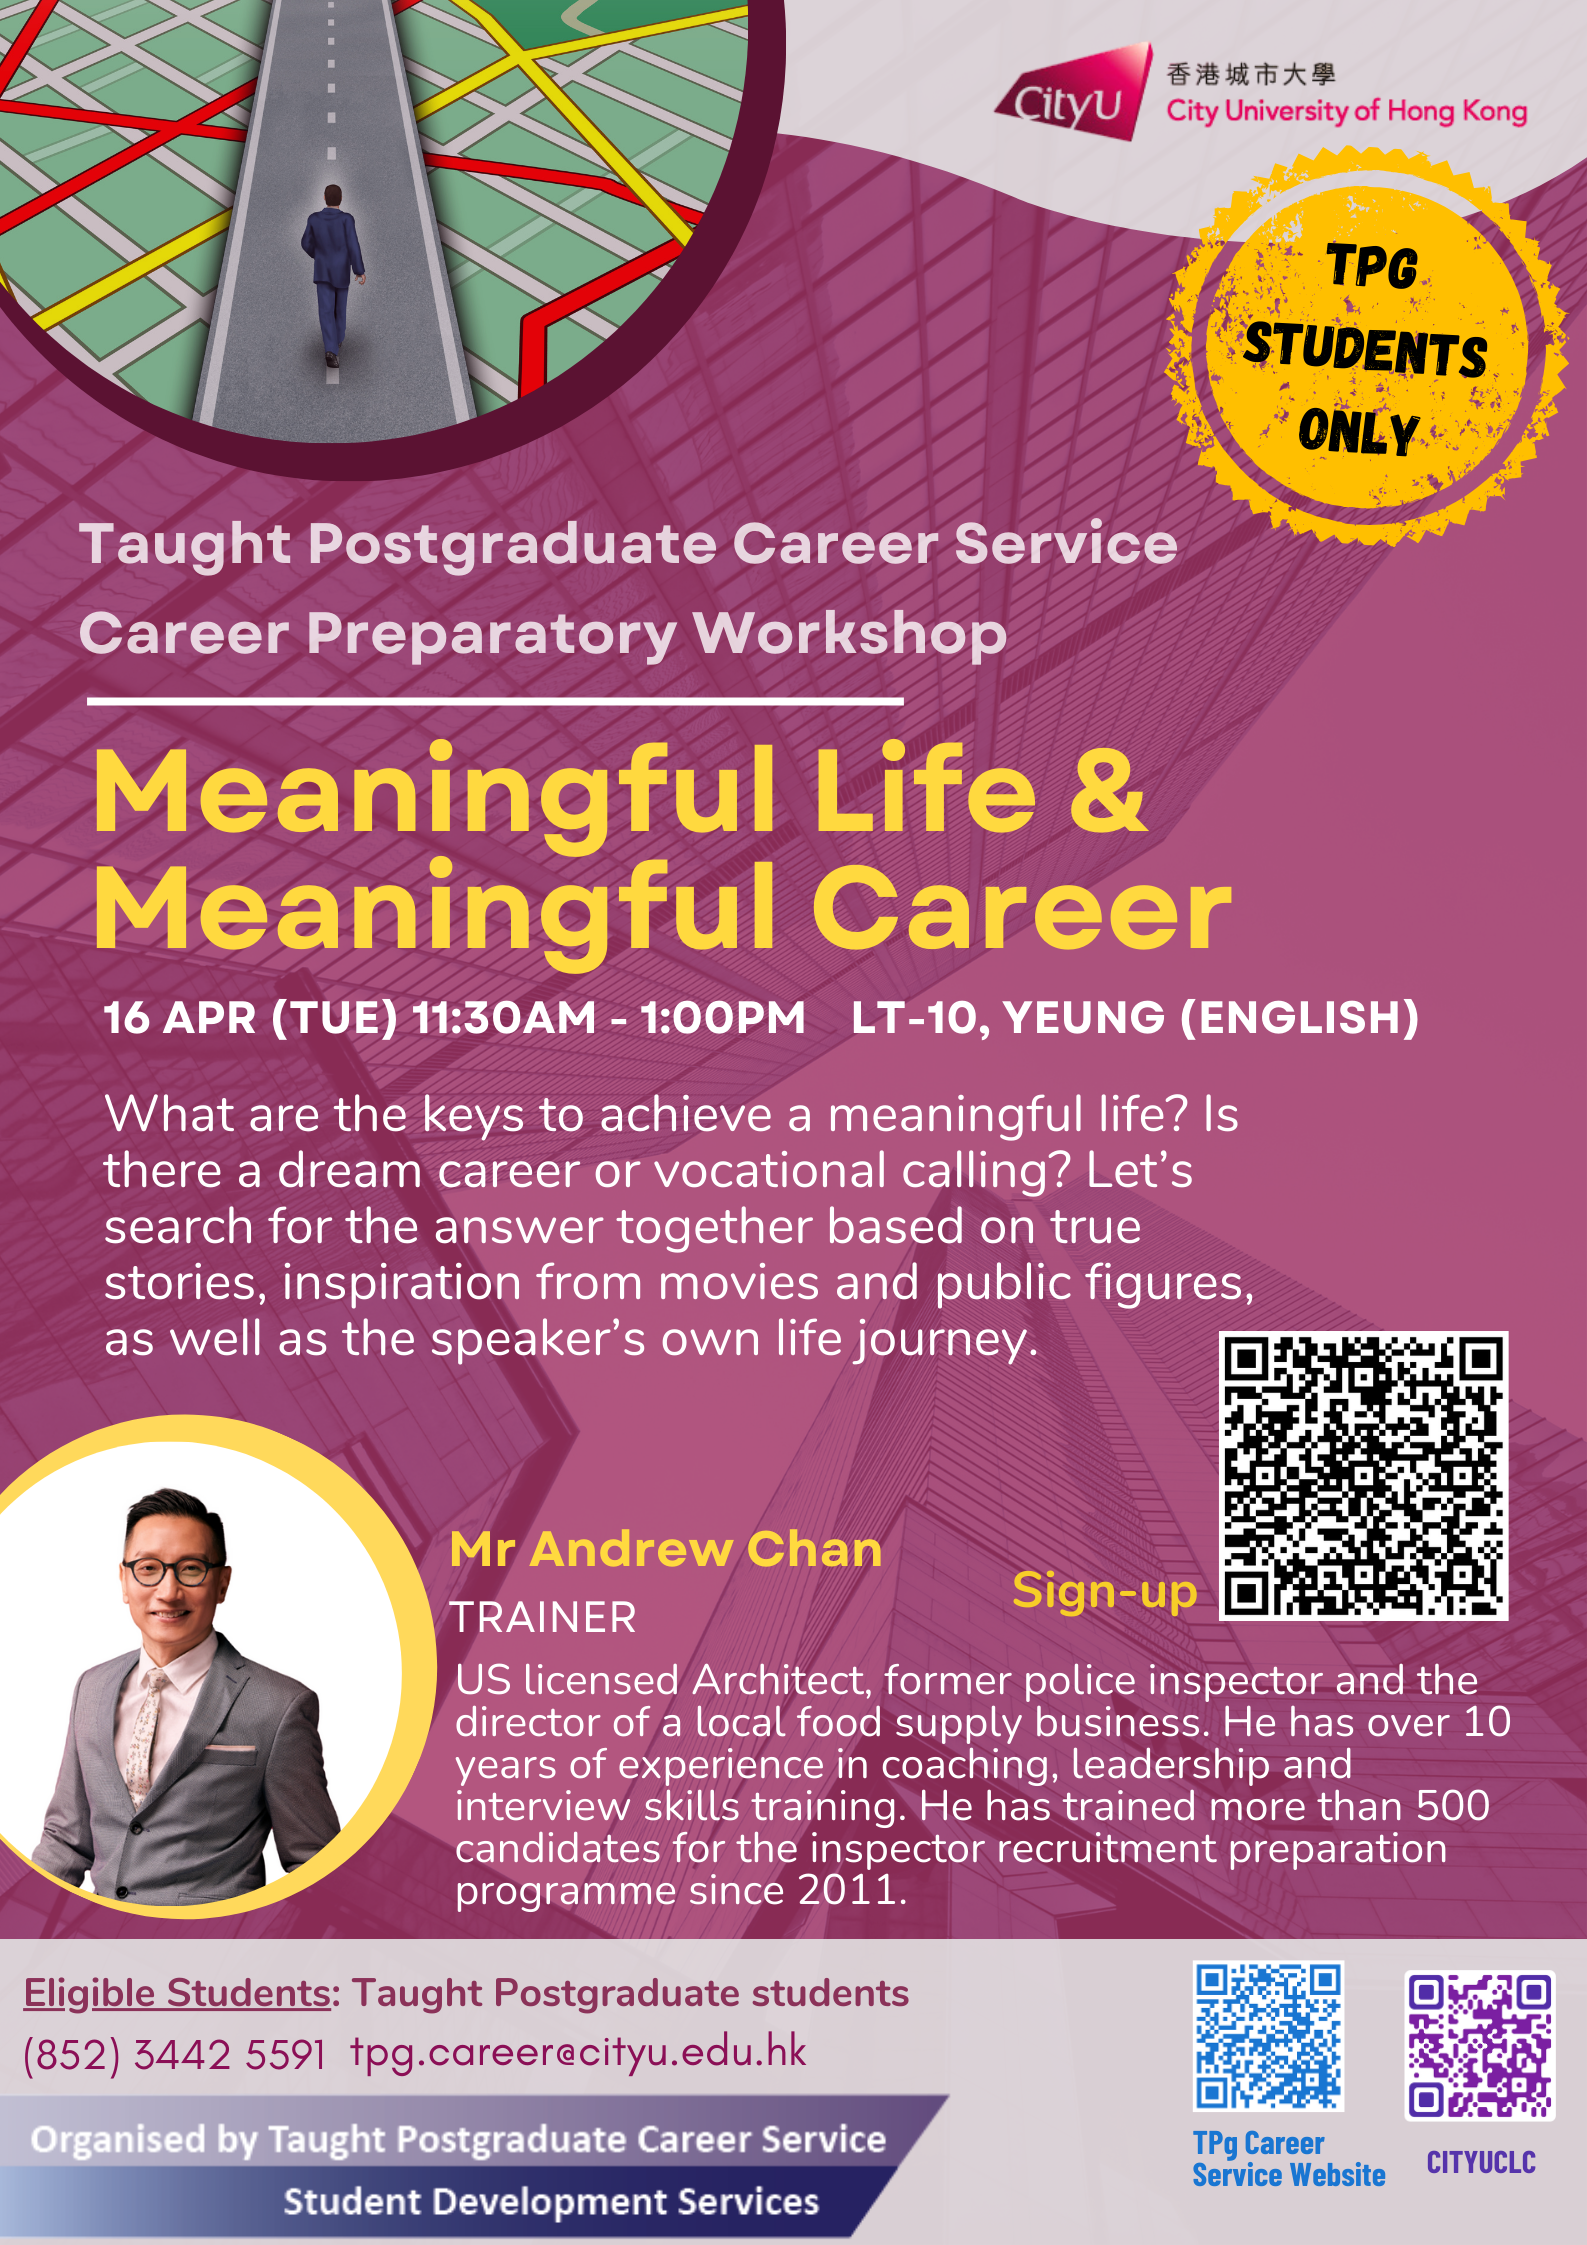 Meaningful Life & Meaningful Career